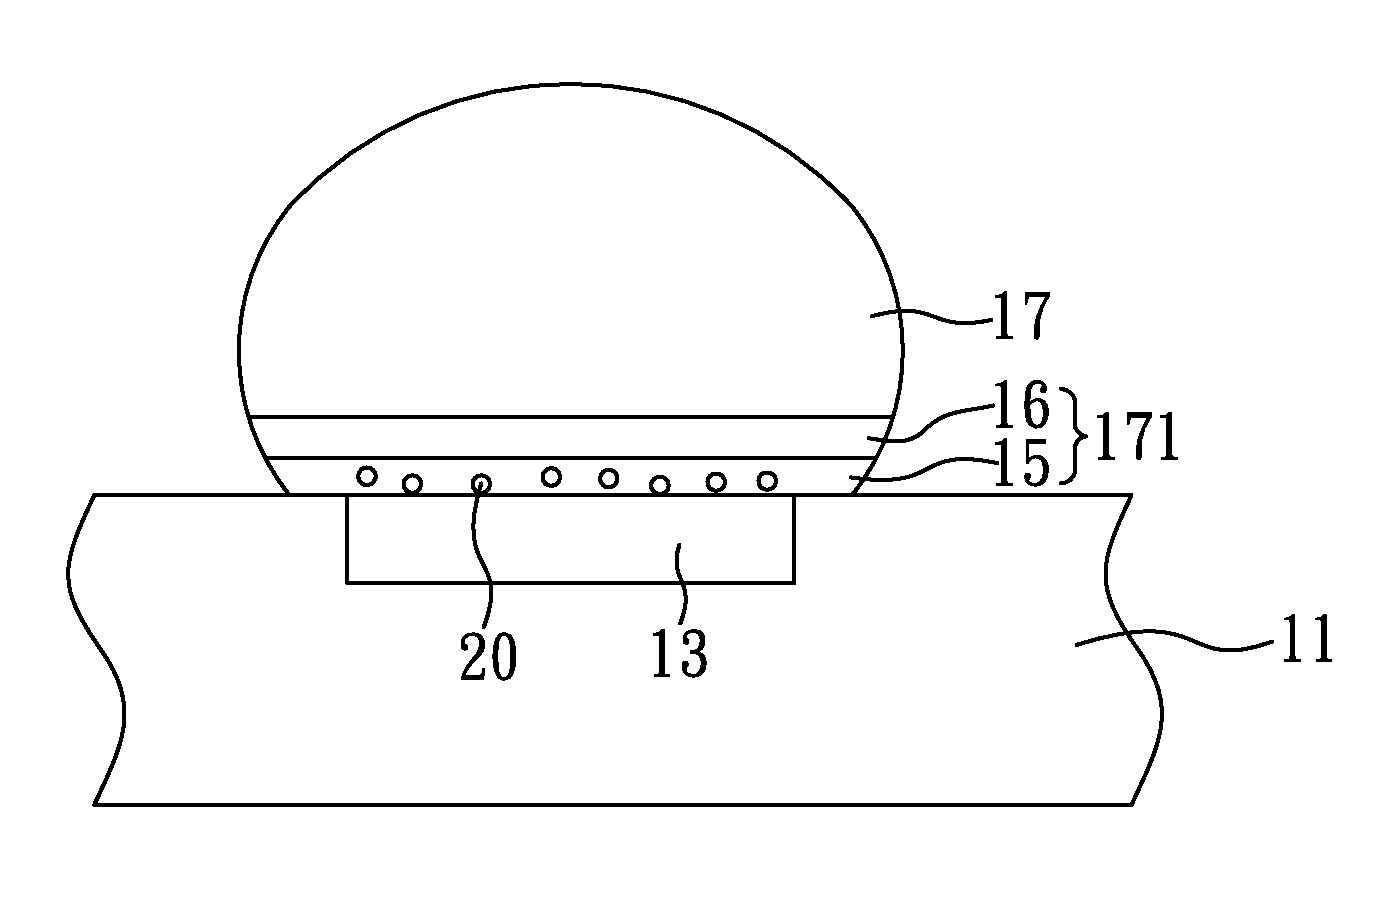 Electrical connecting element having nano-twinned copper, method of fabricating the same, and electrical connecting structure comprising the same